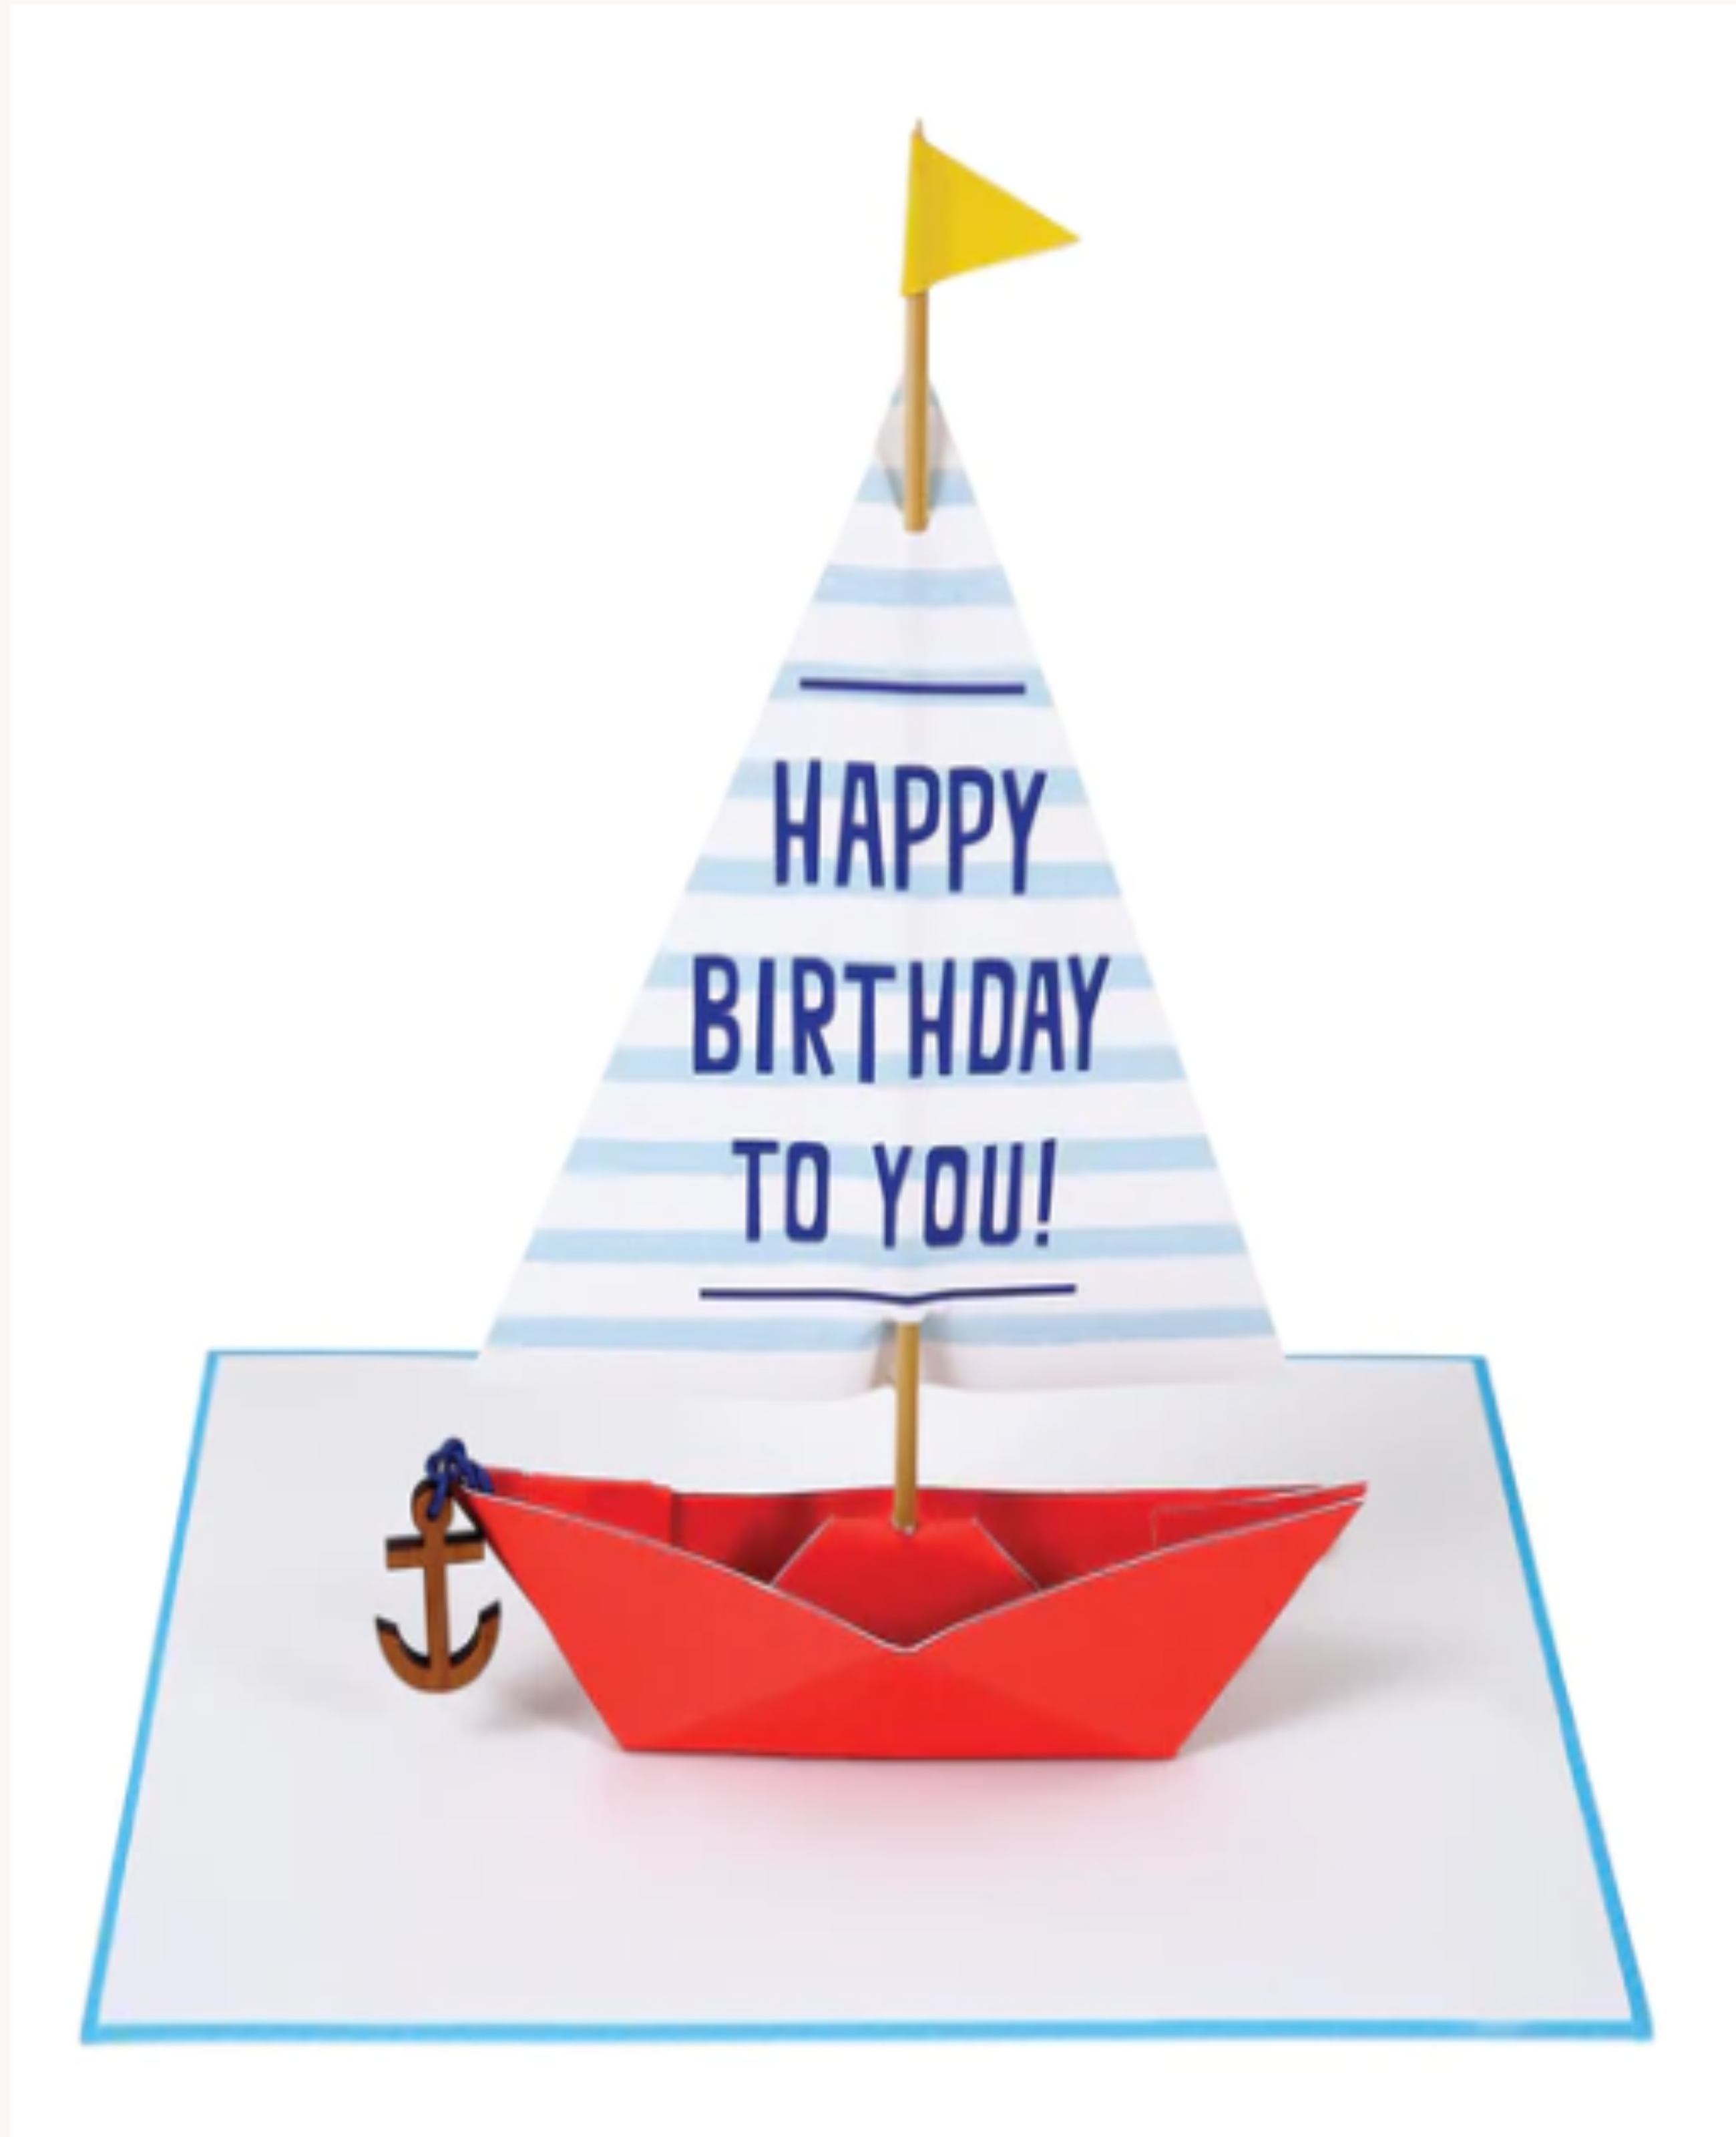 Sailing Boat Stand-Up Card